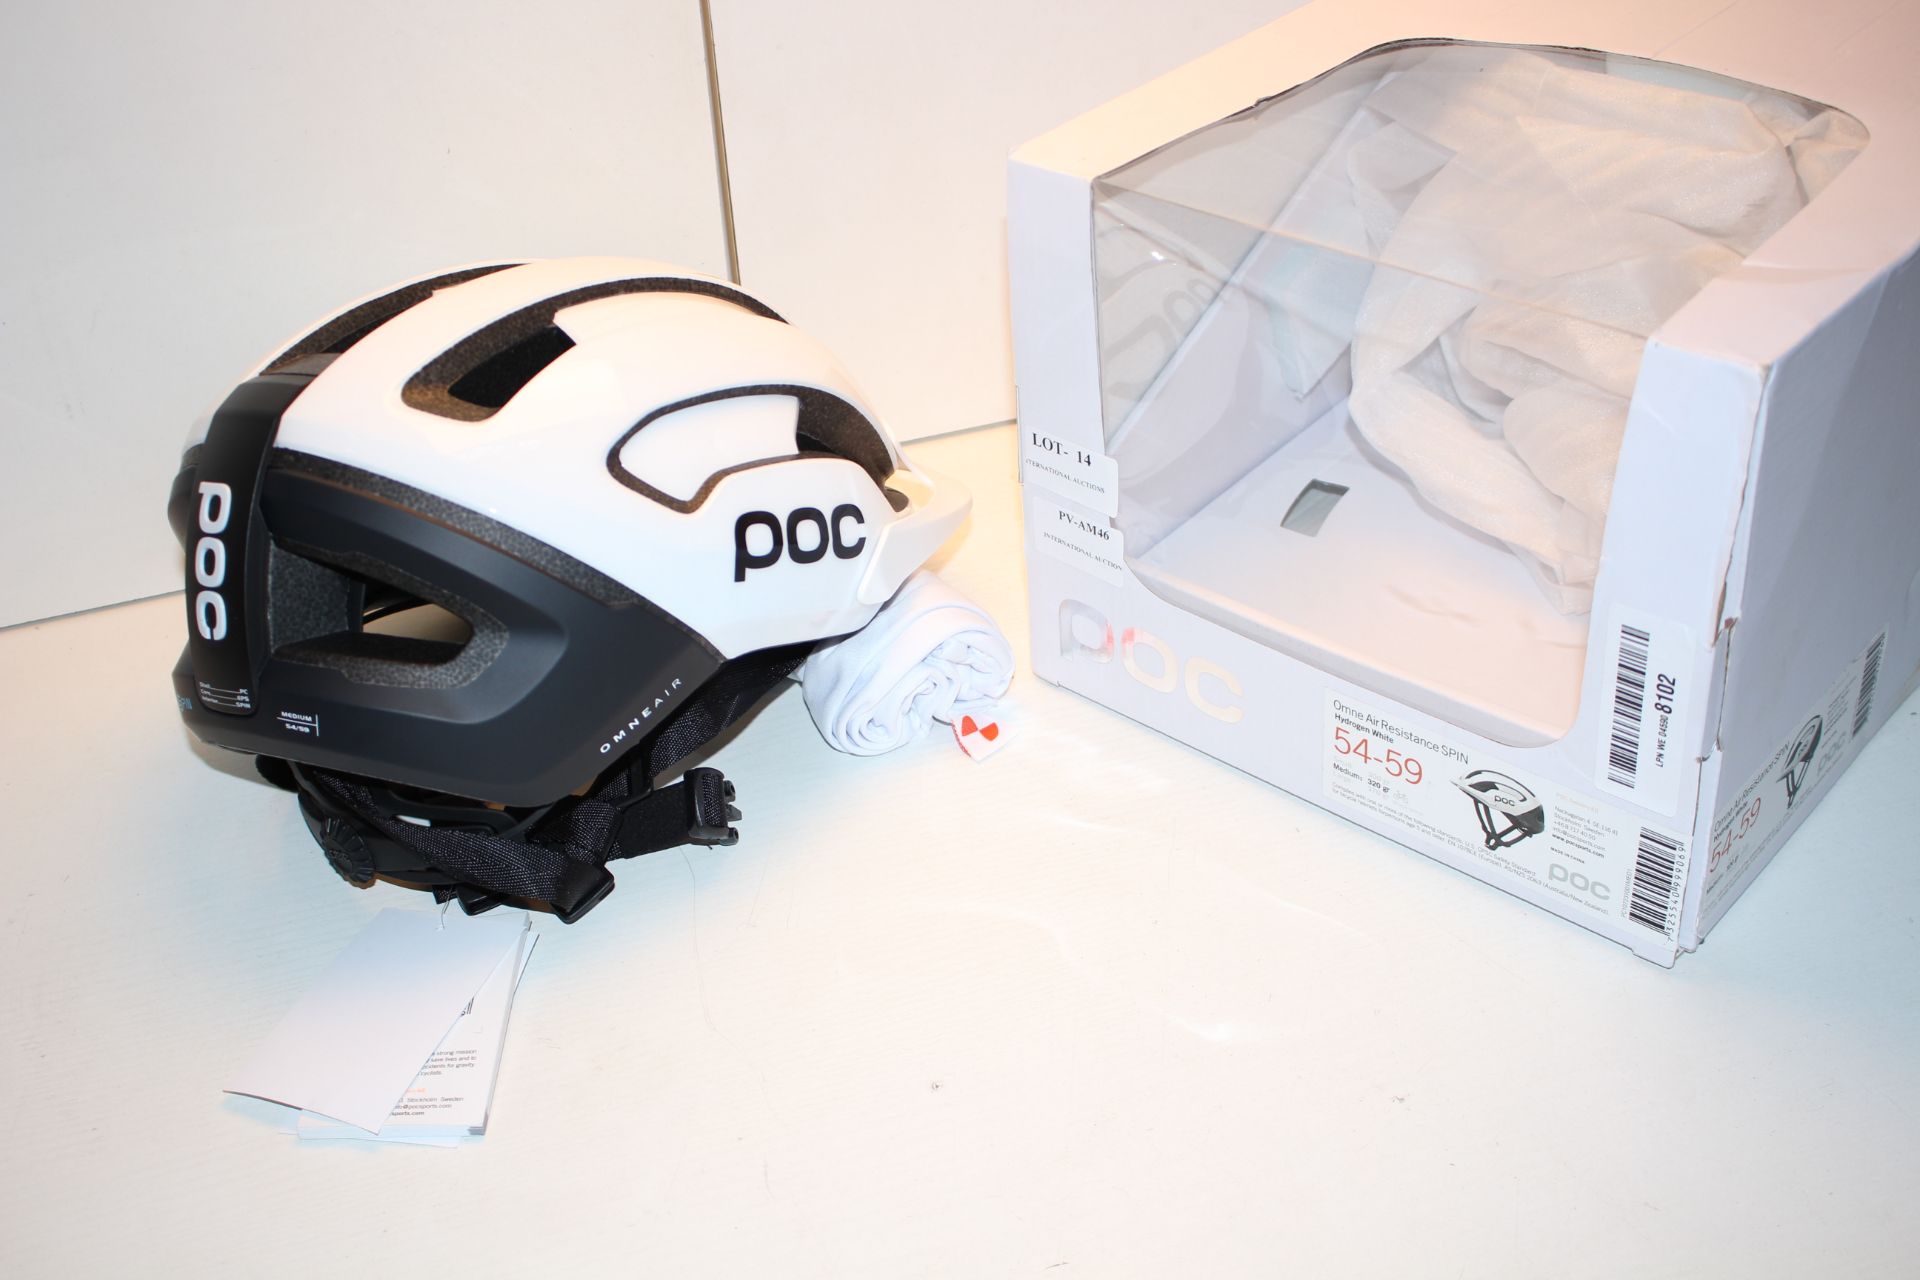 BOXED POC OMNE AIR RESISTANCE SPIN 54-59 MEDIUM 320G HELMET RRP £111.00Condition ReportAppraisal